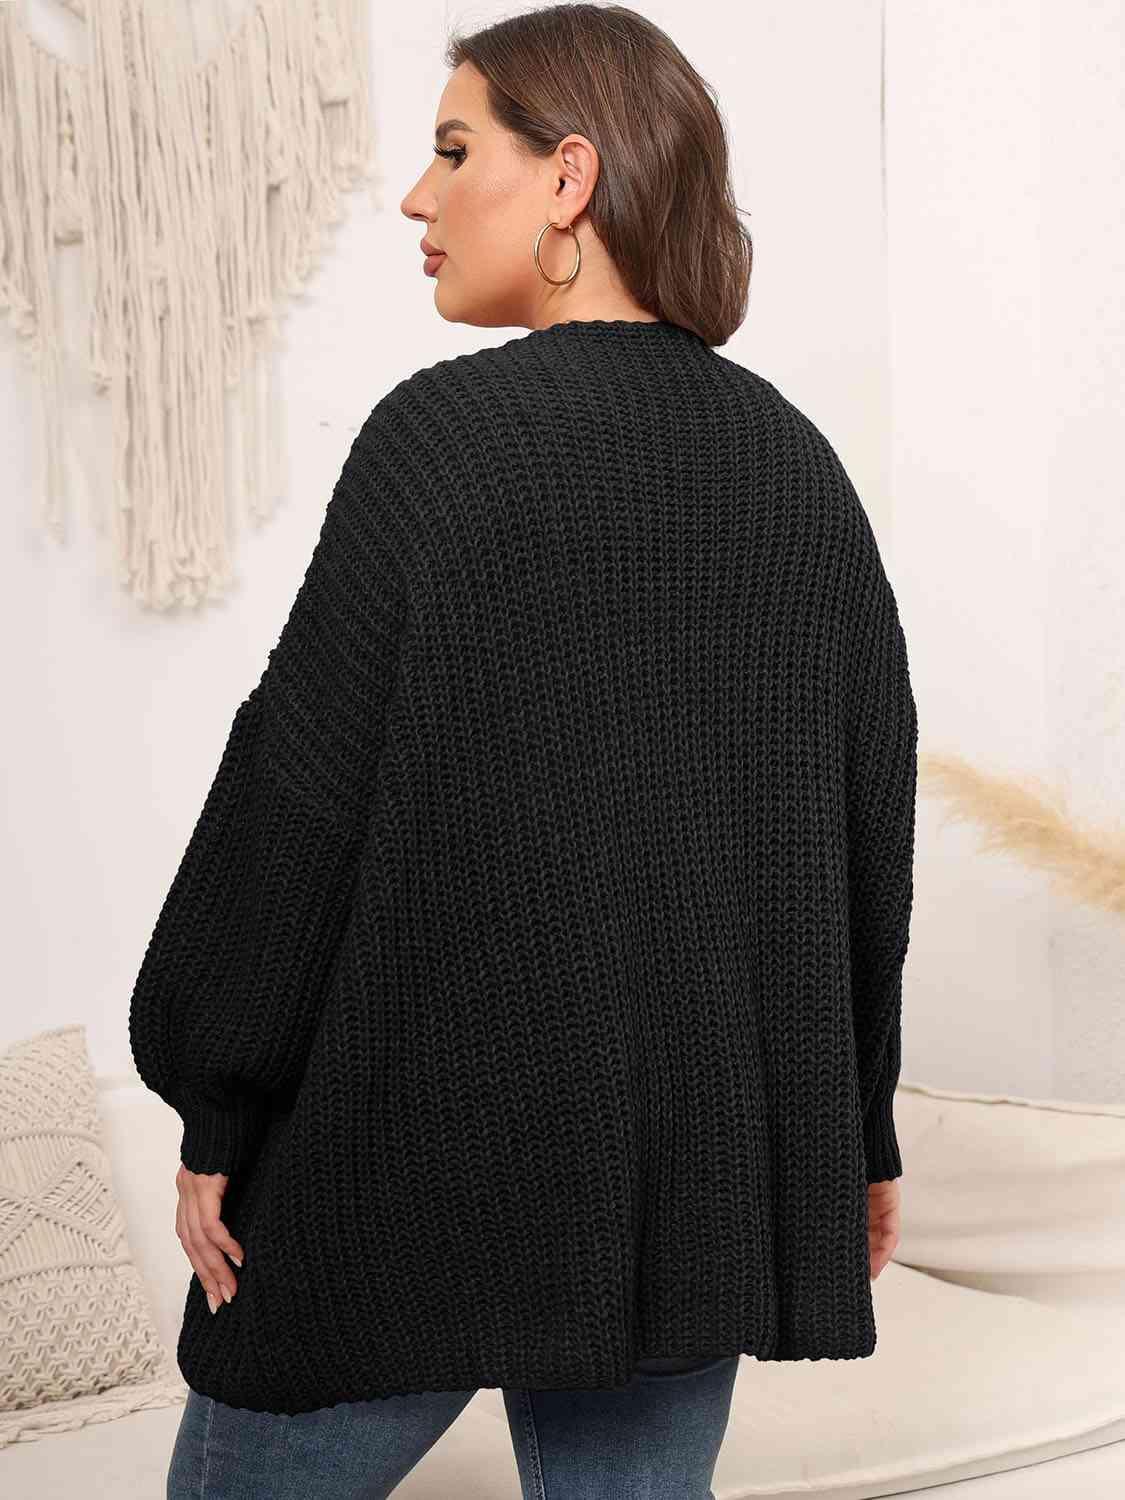 Precisely Knitted Plus Size Open Front Cardigan - MXSTUDIO.COM